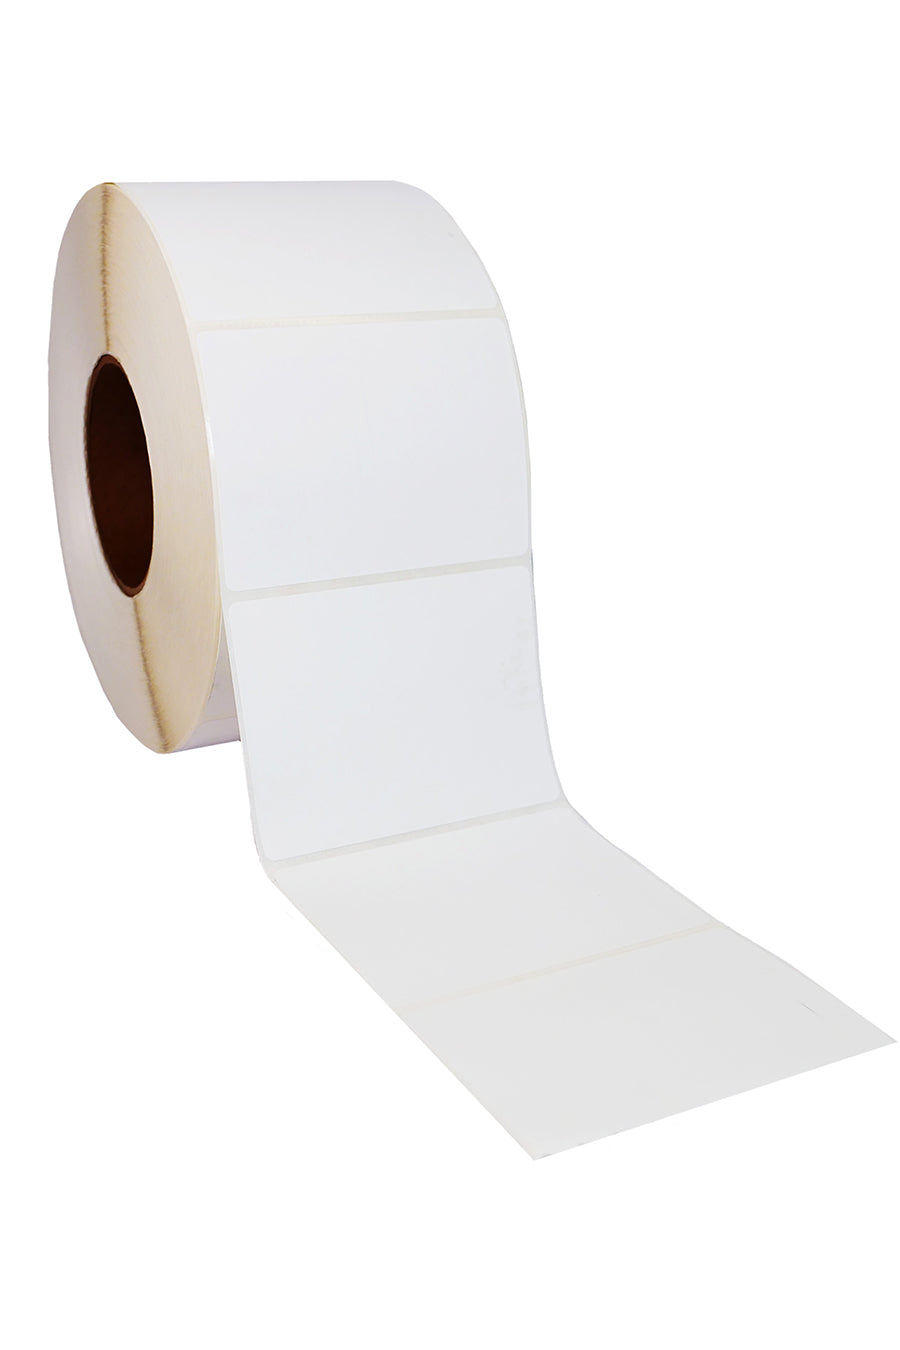 Thermal Transfer White Shipping Labels, 4" x 3", 1800/Roll, 4 Rolls/Ea